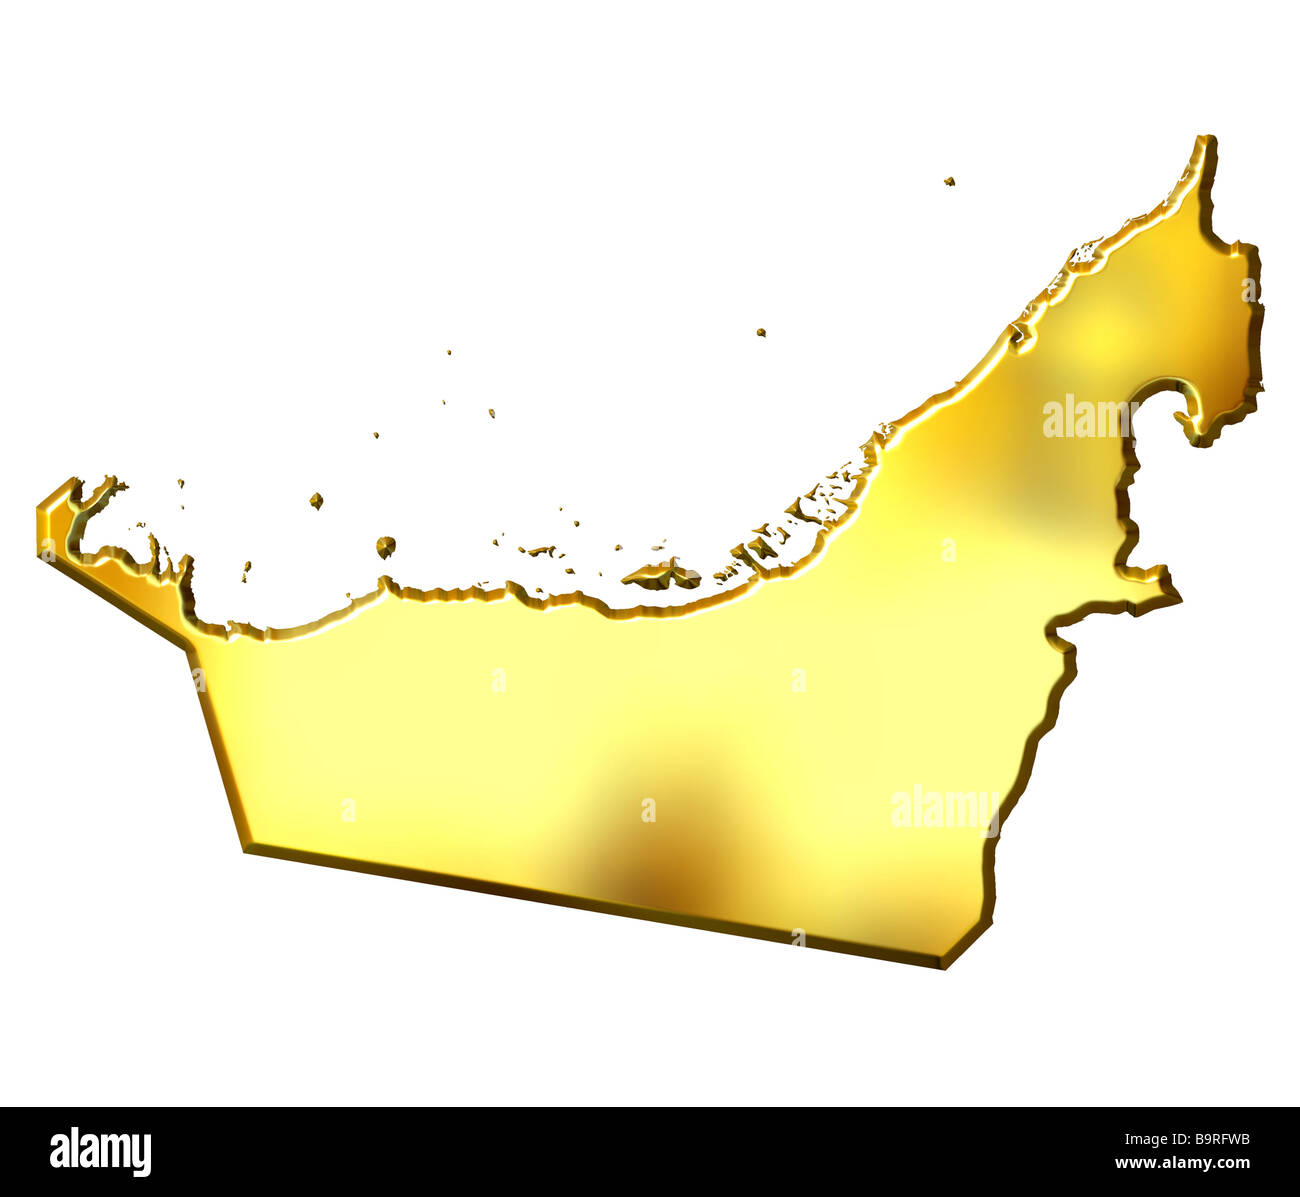 United Arab Emirates 3d golden map isolated in white Stock Photo